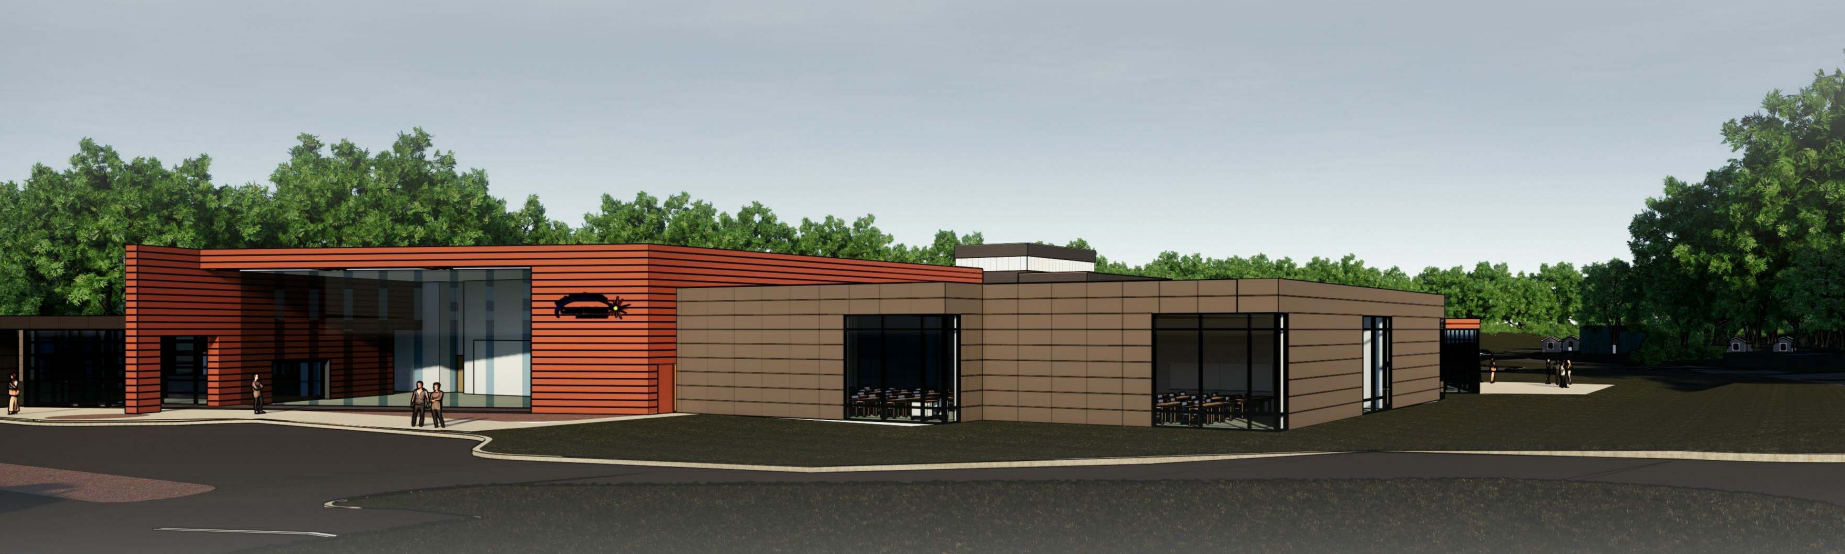 Rendering of Central Hudson's Training Academy